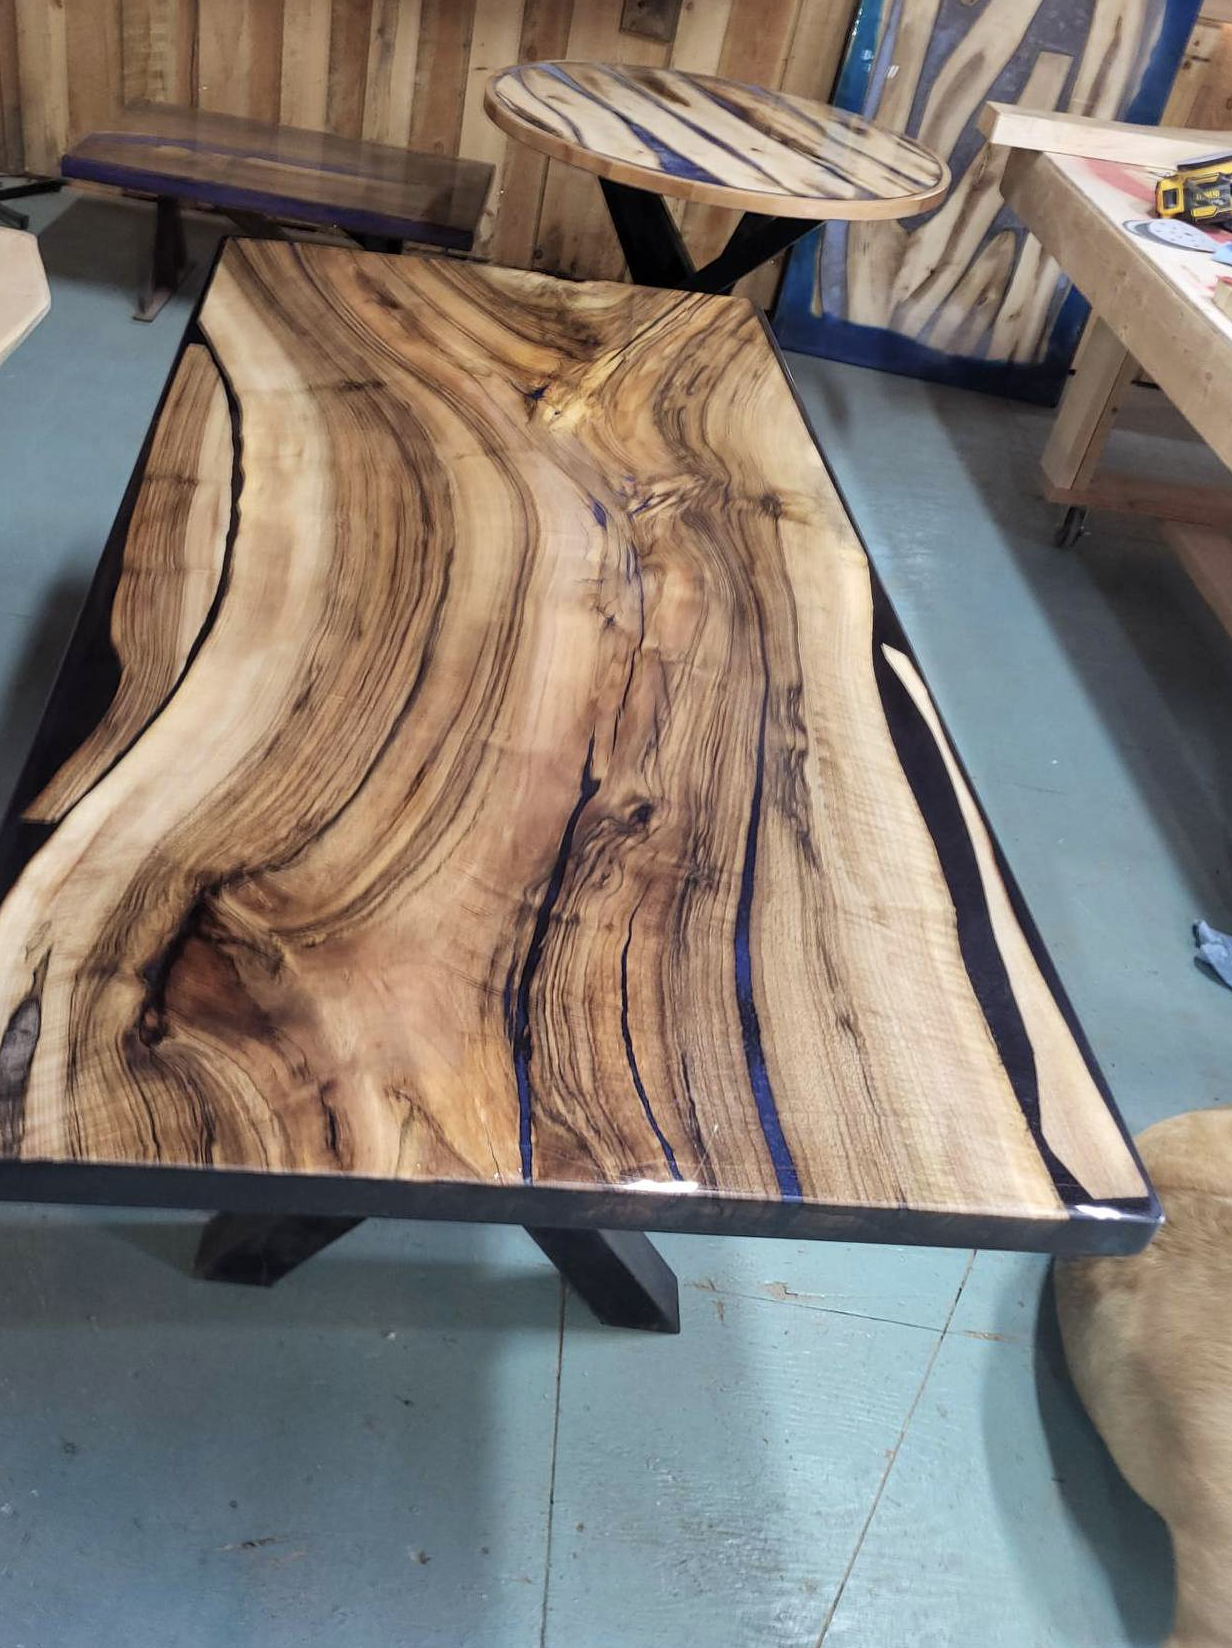 custom hand made wood tables furniture countertops from chilliwack british columbia canada 23187